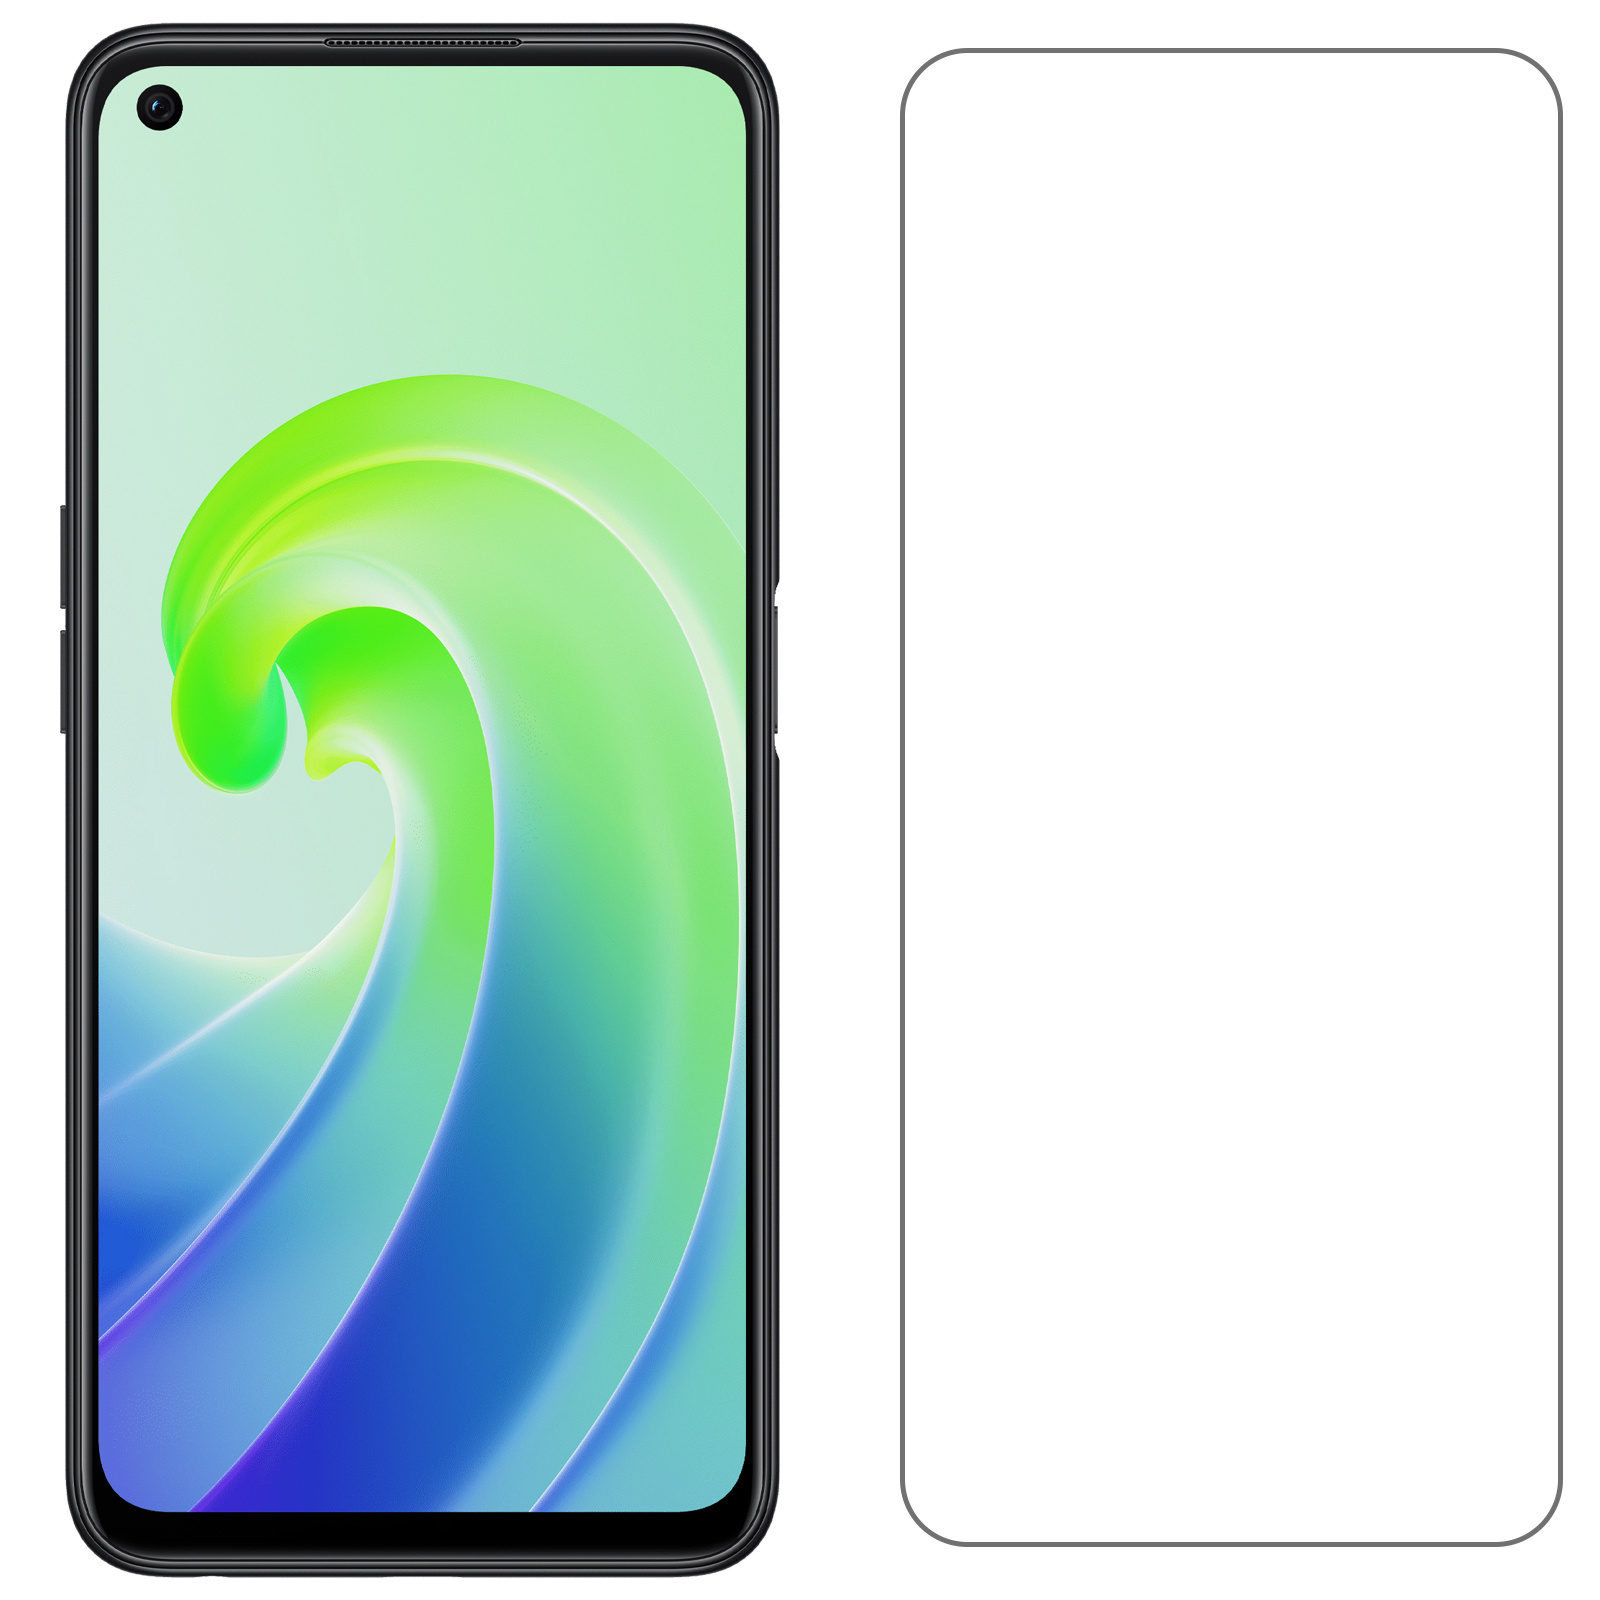 NoXx OPPO A76 Hoesje Back Cover Siliconen Case Hoes Met Screenprotector - Lichtroze